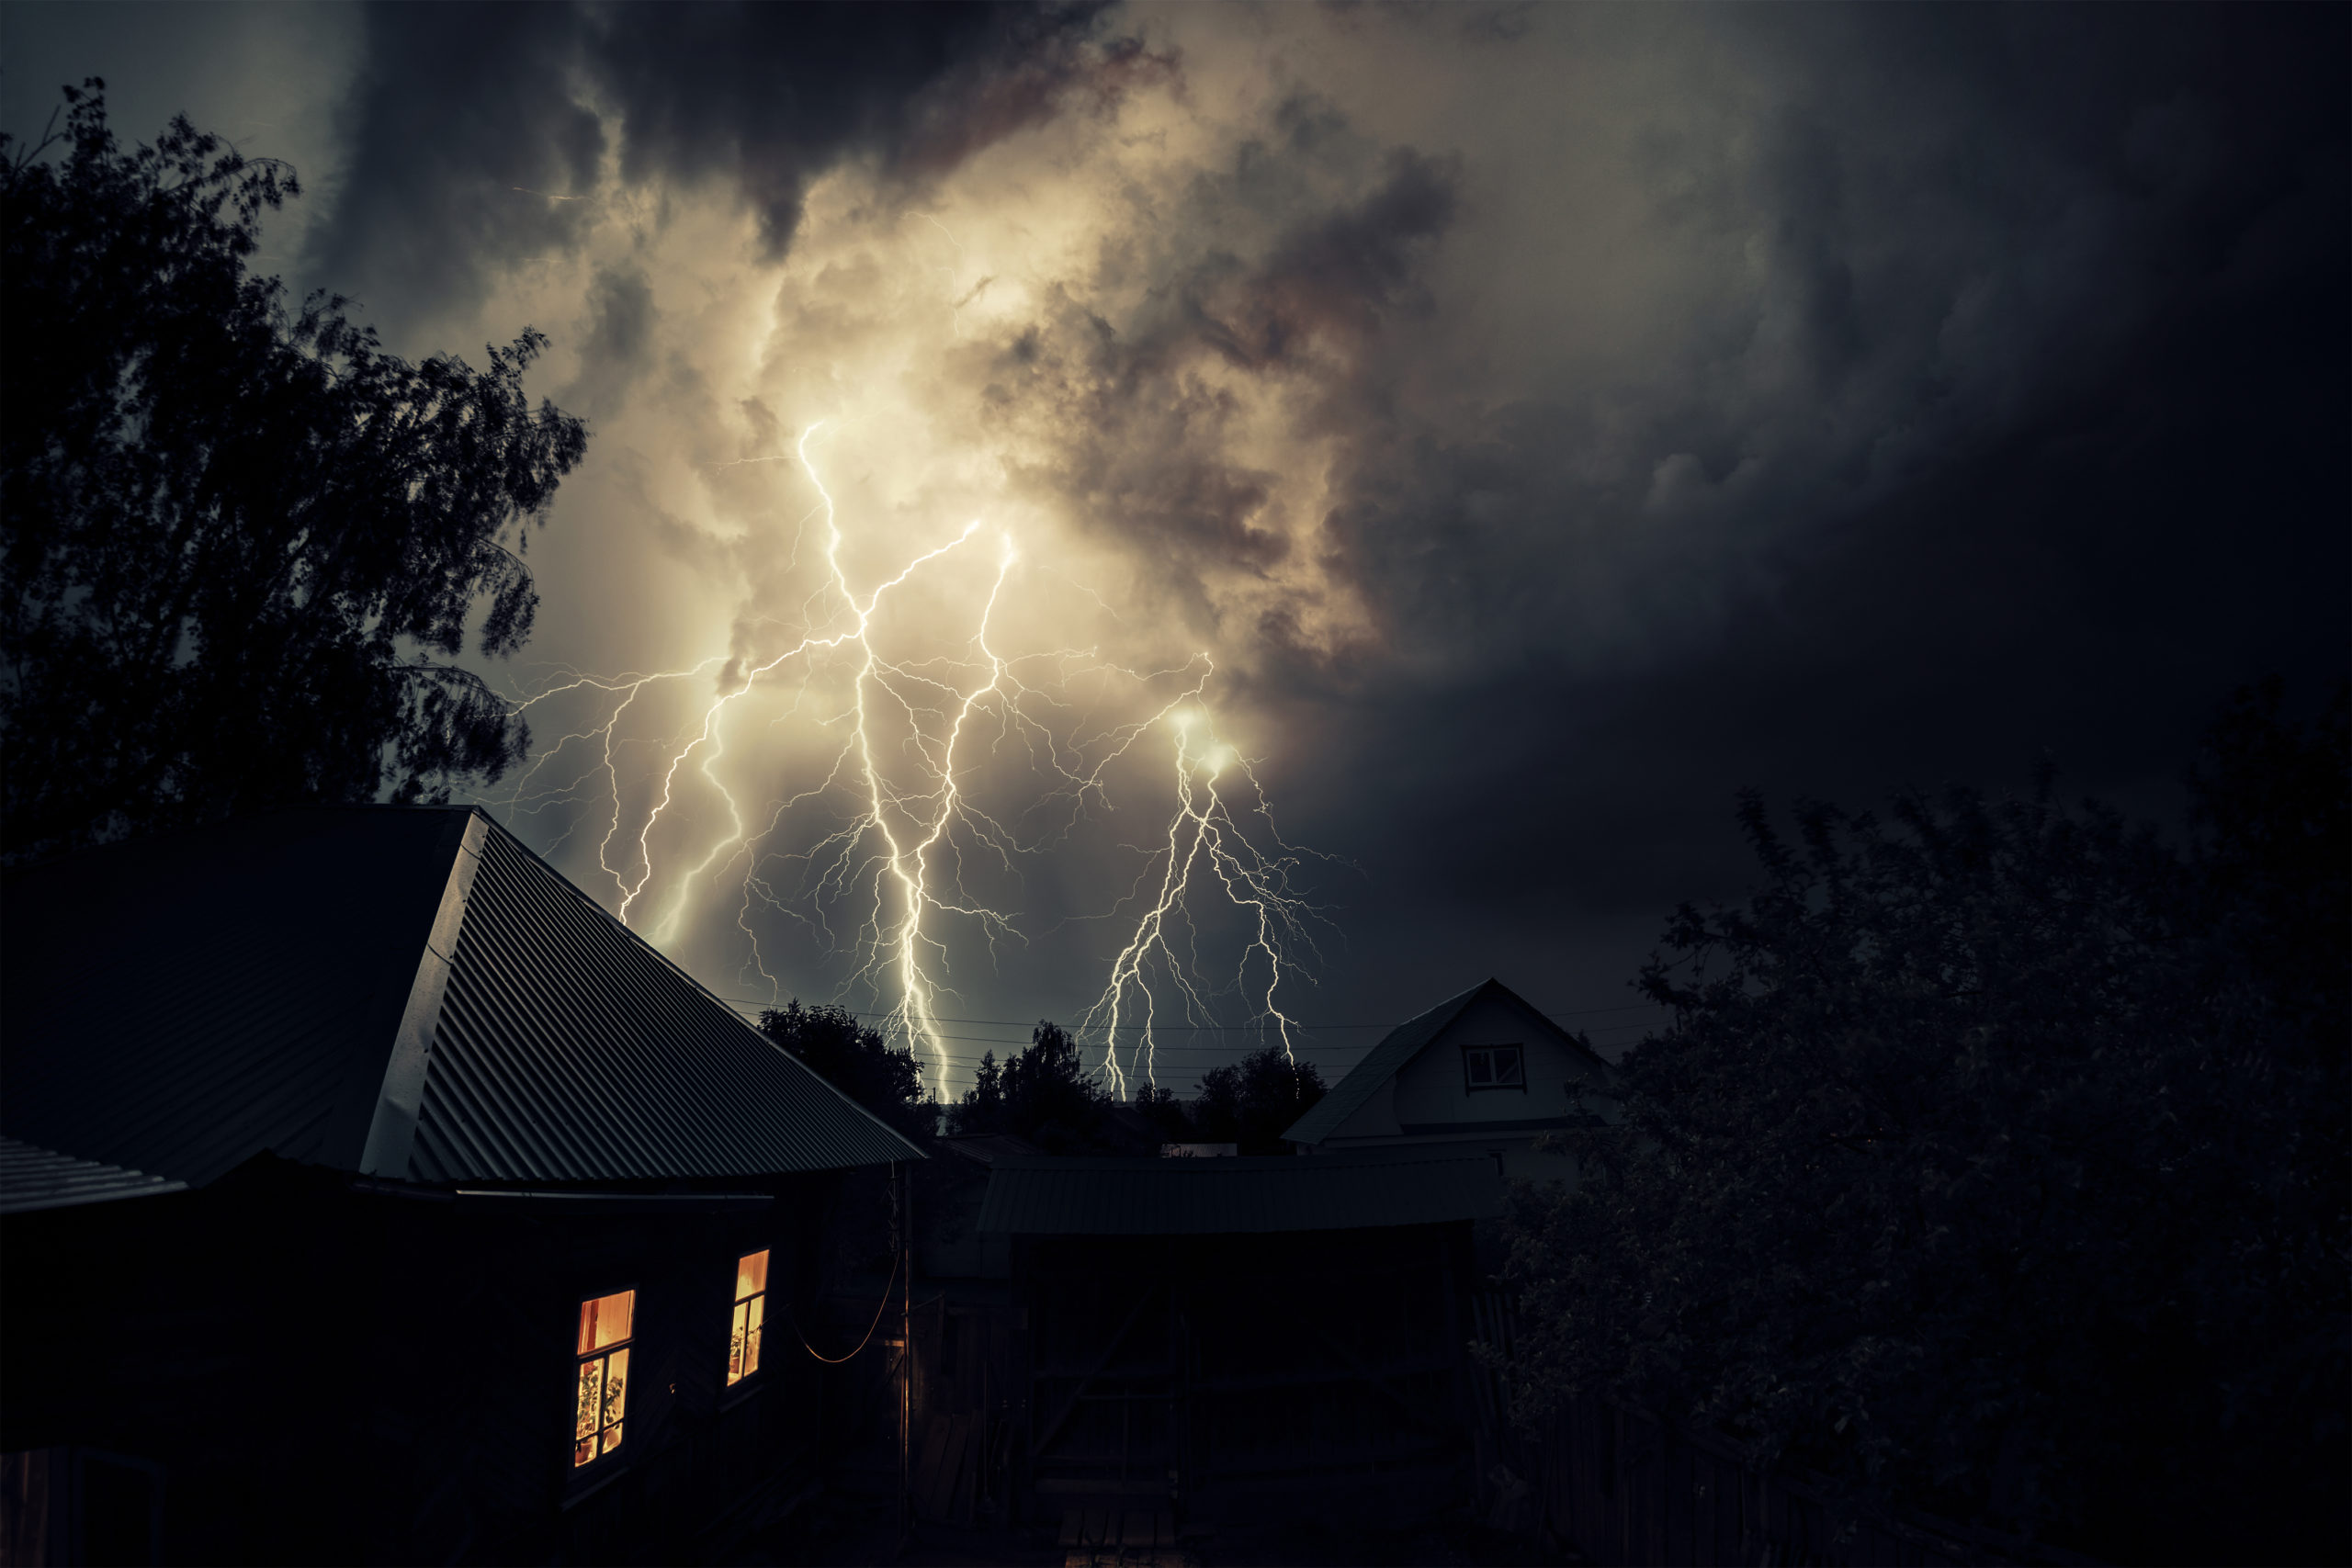 A House's lights remain on thanks to a Redback Smart Battery during a lighting storm